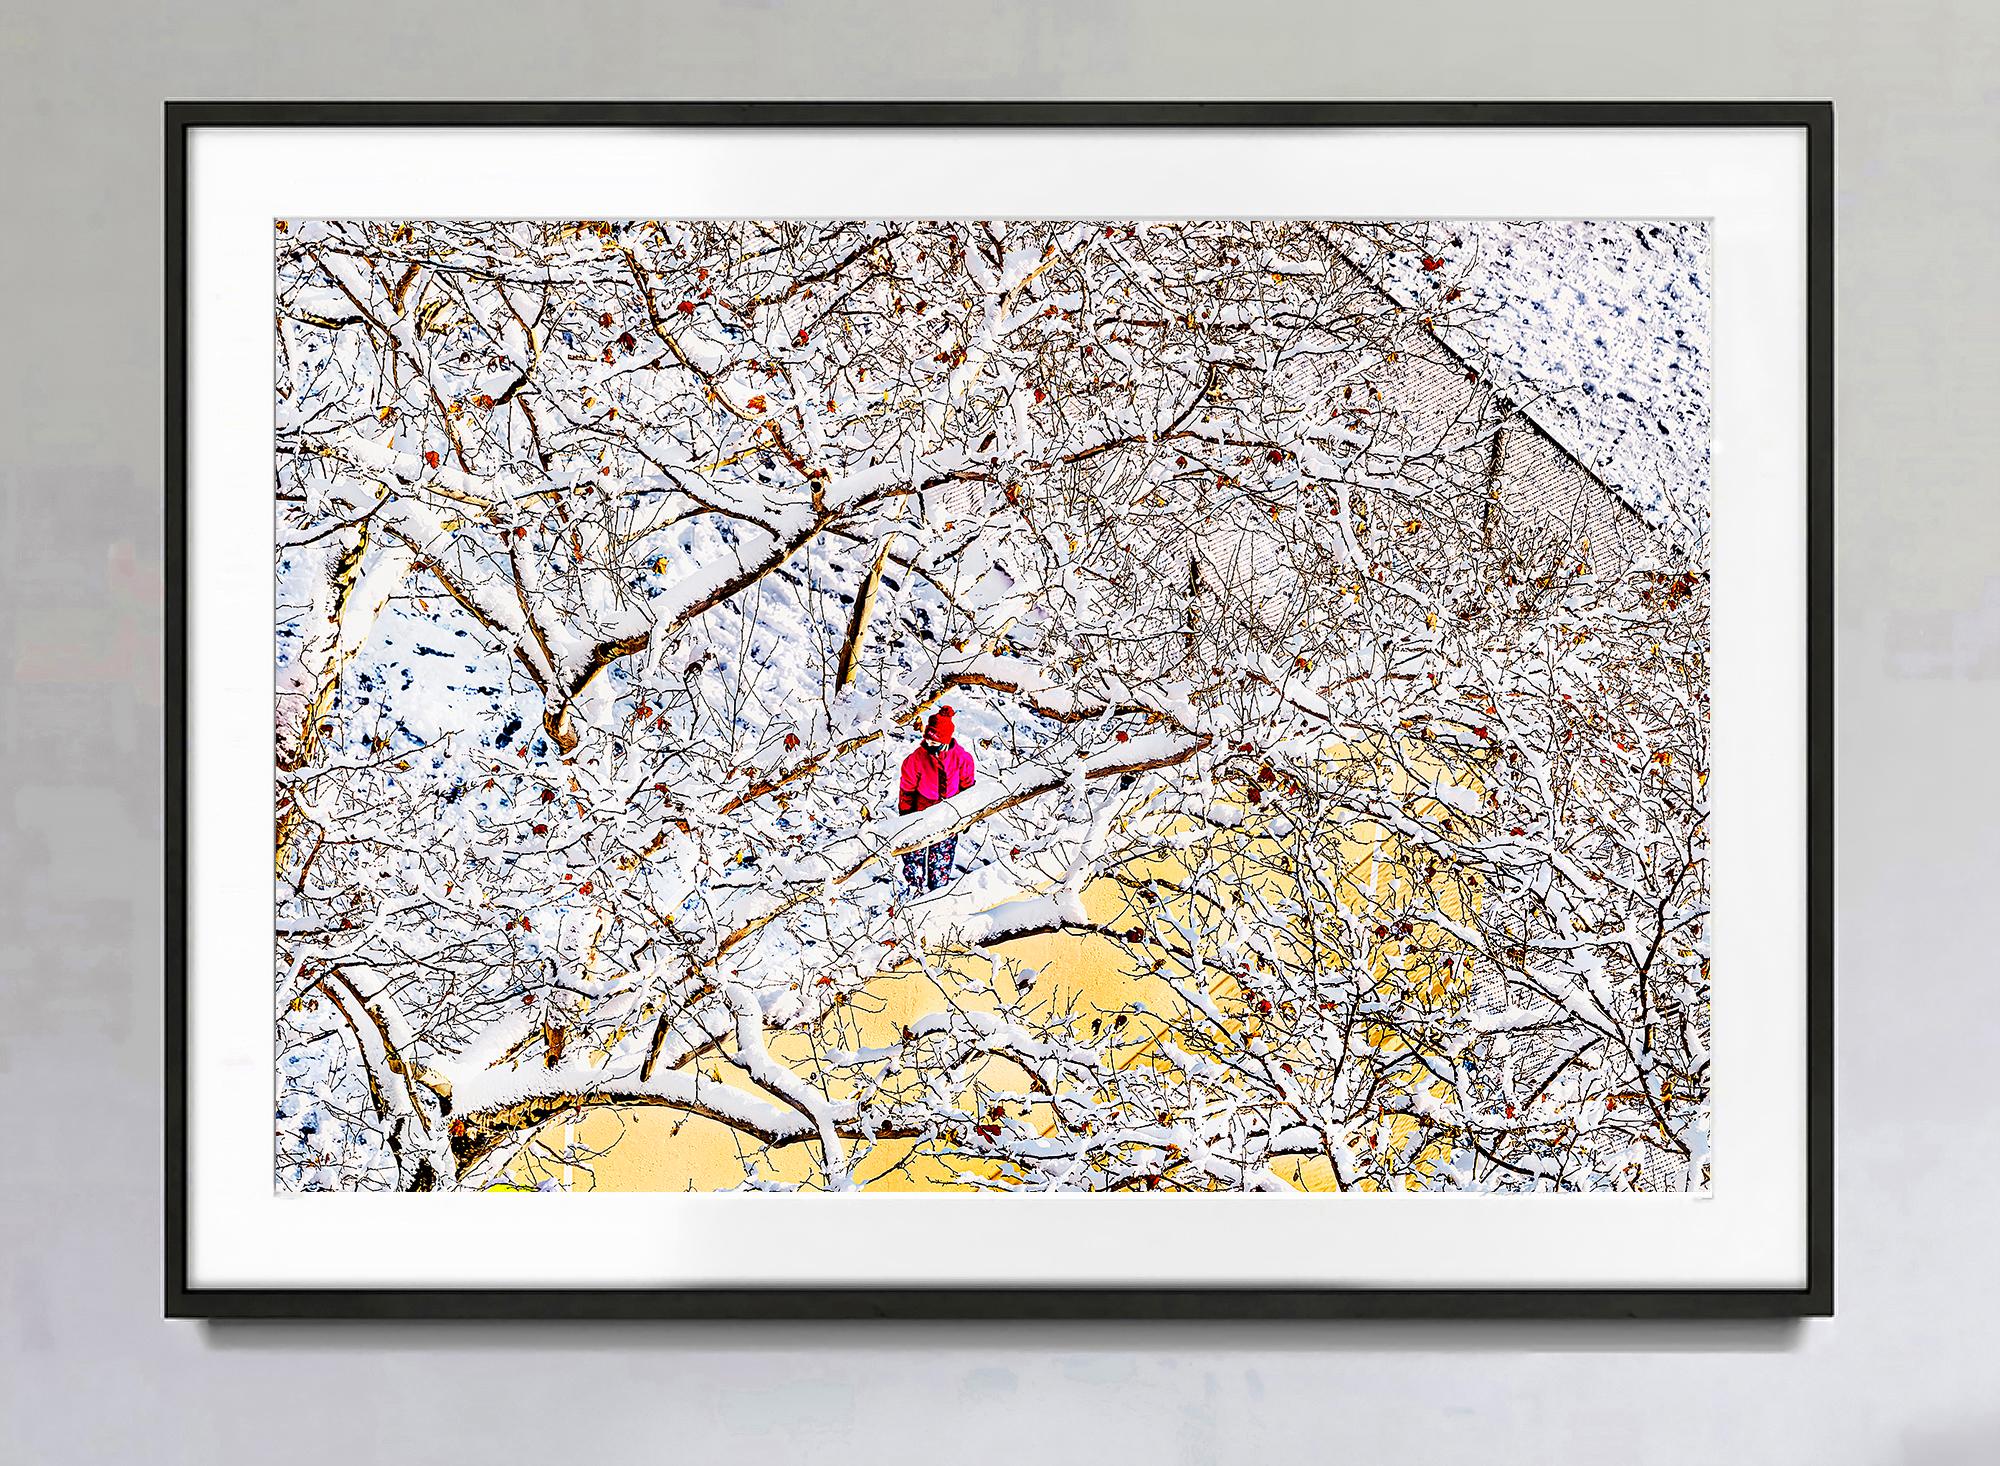 Abstract Winter Scene with Single Figure in Red Coat - Photograph by Mitchell Funk